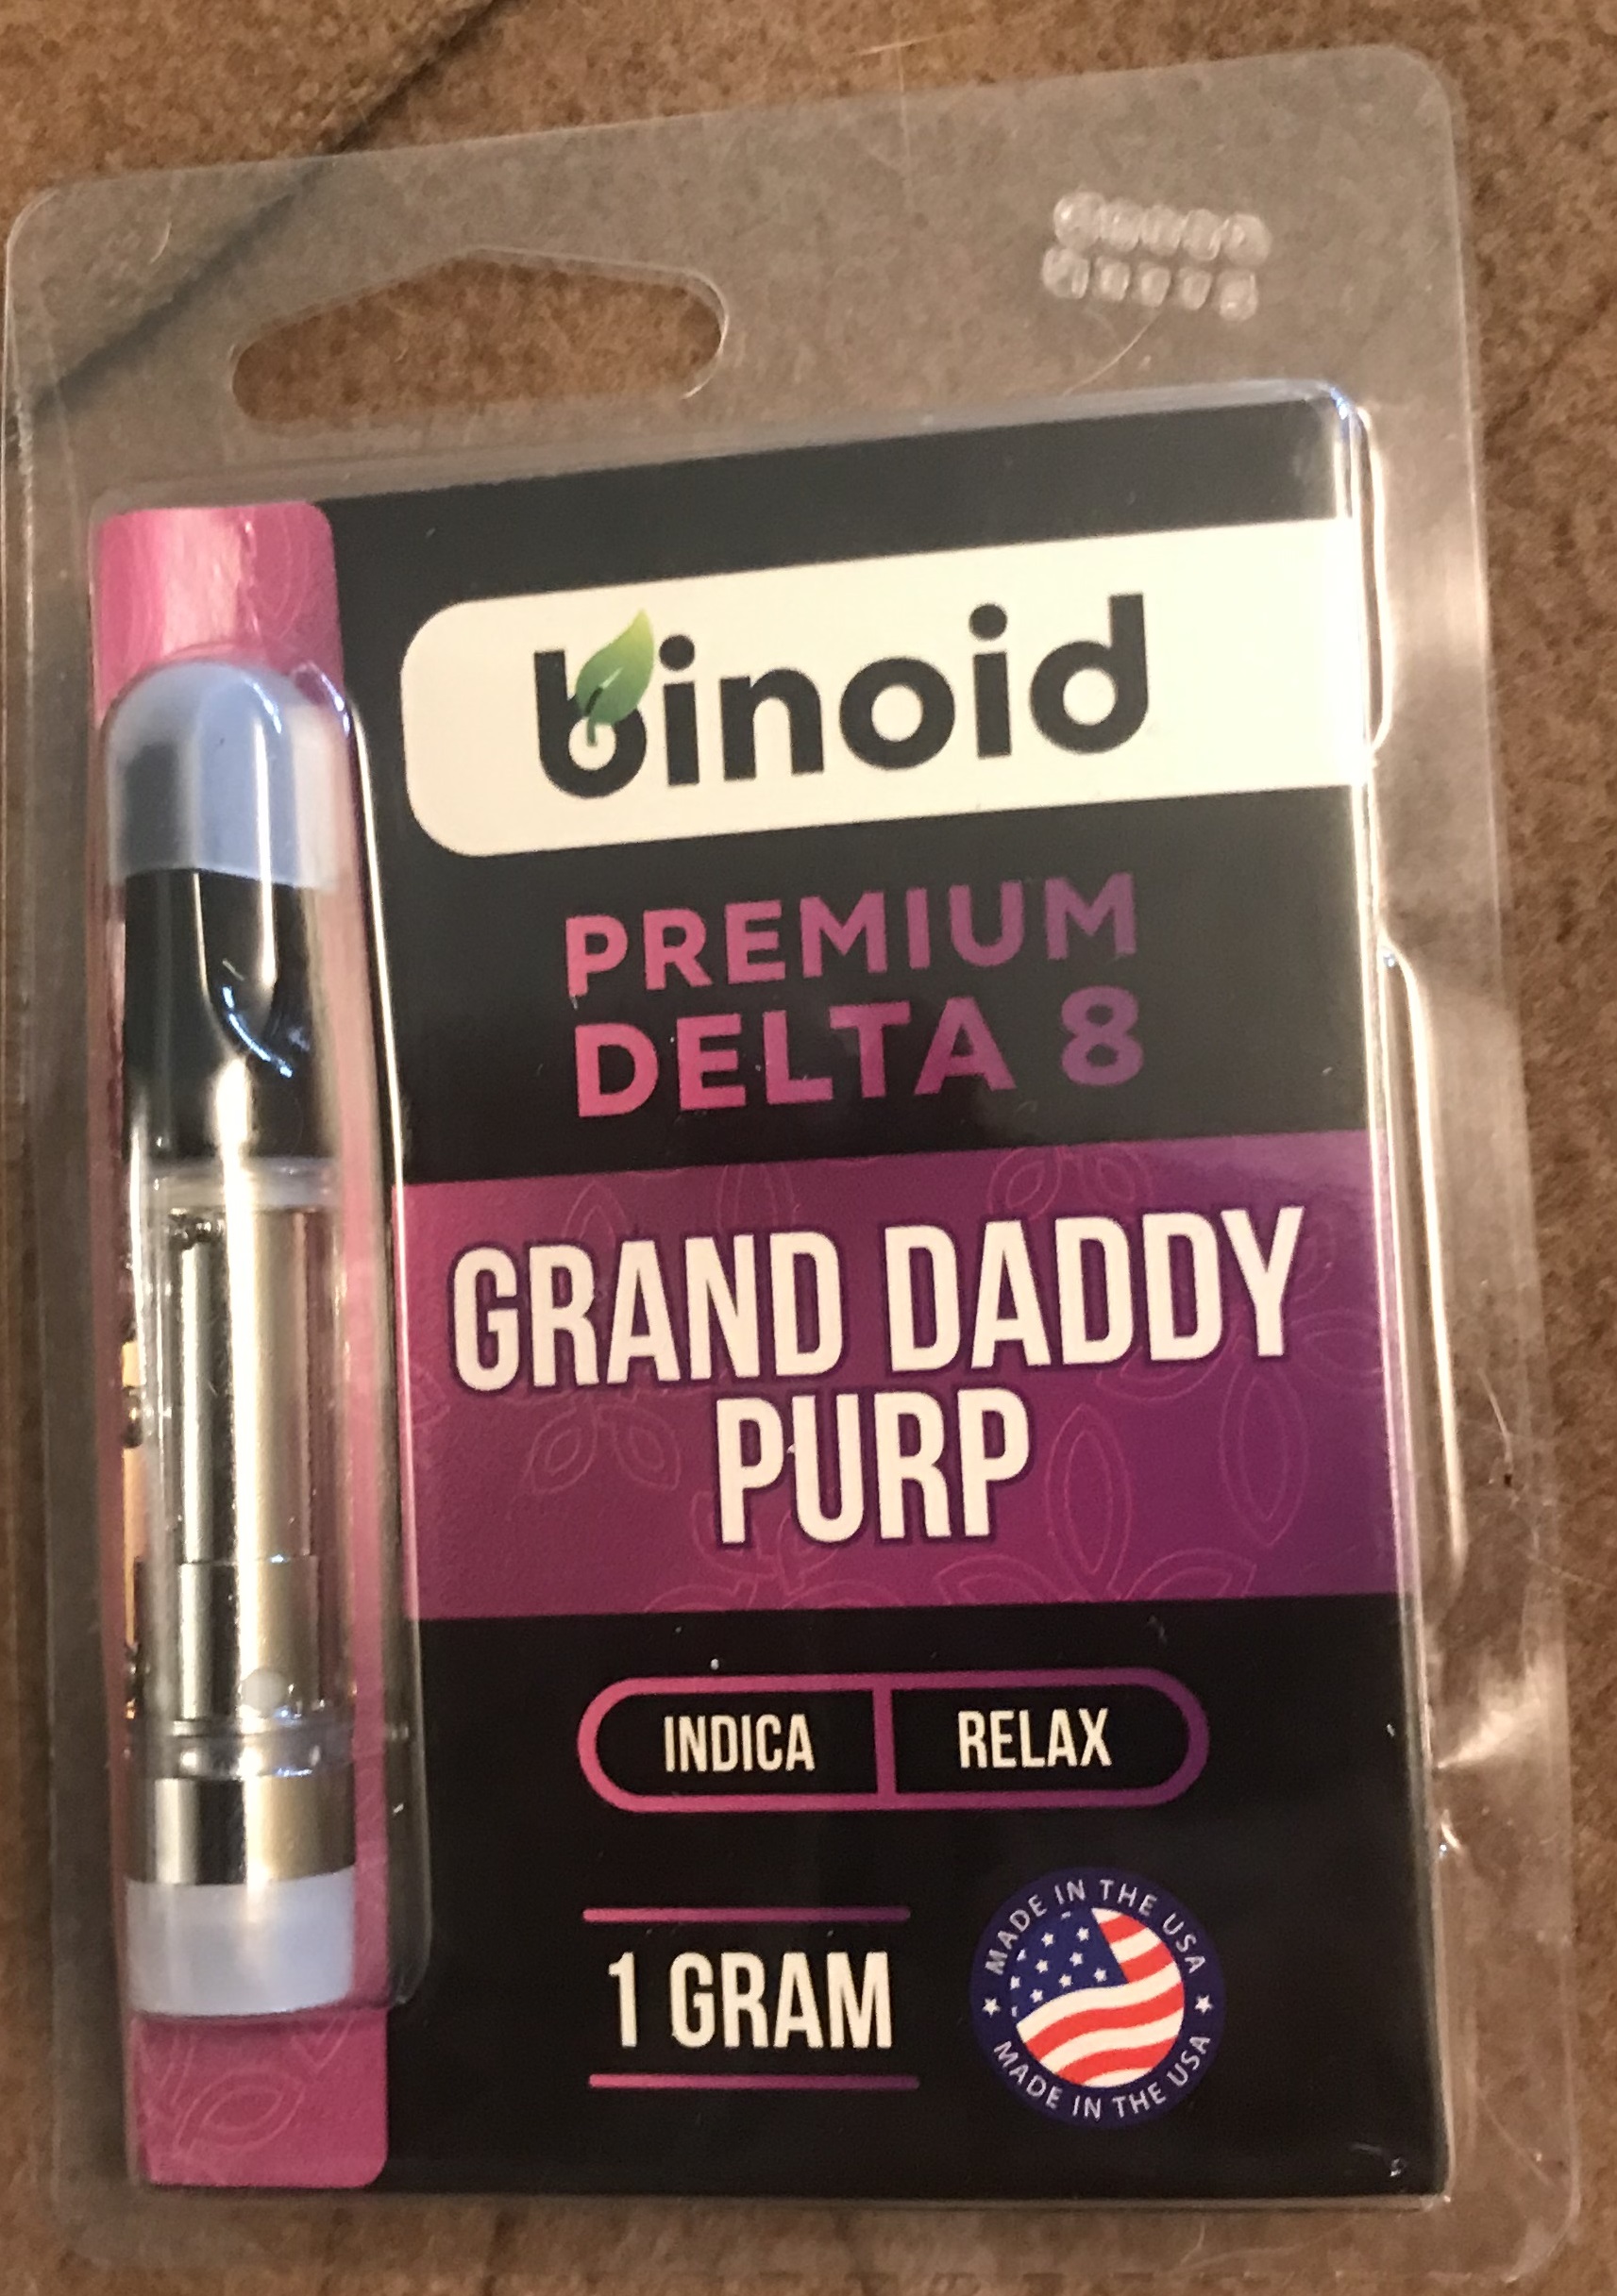 Delta 8 Best - Products|Thc|Hemp|Brand|Gummies|Product|Delta-8|Cbd|Origin|Cannabis|Delta|Users|Effects|Cartridges|Brands|Range|List|Research|Usasource|Options|Benefits|Plant|Companies|Vape|Source|Results|Gummy|People|Space|High-Quality|Quality|Place|Overview|Flowers|Lab|Drug|Cannabinoids|Tinctures|Overviewproducts|Cartridge|Delta-8 Thc|Delta-8 Products|Delta-9 Thc|Delta-8 Brands|Usa Source|Delta-8 Thc Products|Cannabis Plant|Federal Level|United States|Delta-8 Gummies|Delta-8 Space|Health Canada|Delta Products|Delta-8 Thc Gummies|Delta-8 Companies|Vape Cartridges|Similar Benefits|Hemp Doctor|Brand Overviewproducts|Drug Test|High-Quality Products|Organic Hemp|San Jose|Editorial Team|Farm Bill|Overview Products|Wide Range|Psychoactive Properties|Reliable Provider|Boston Hempire